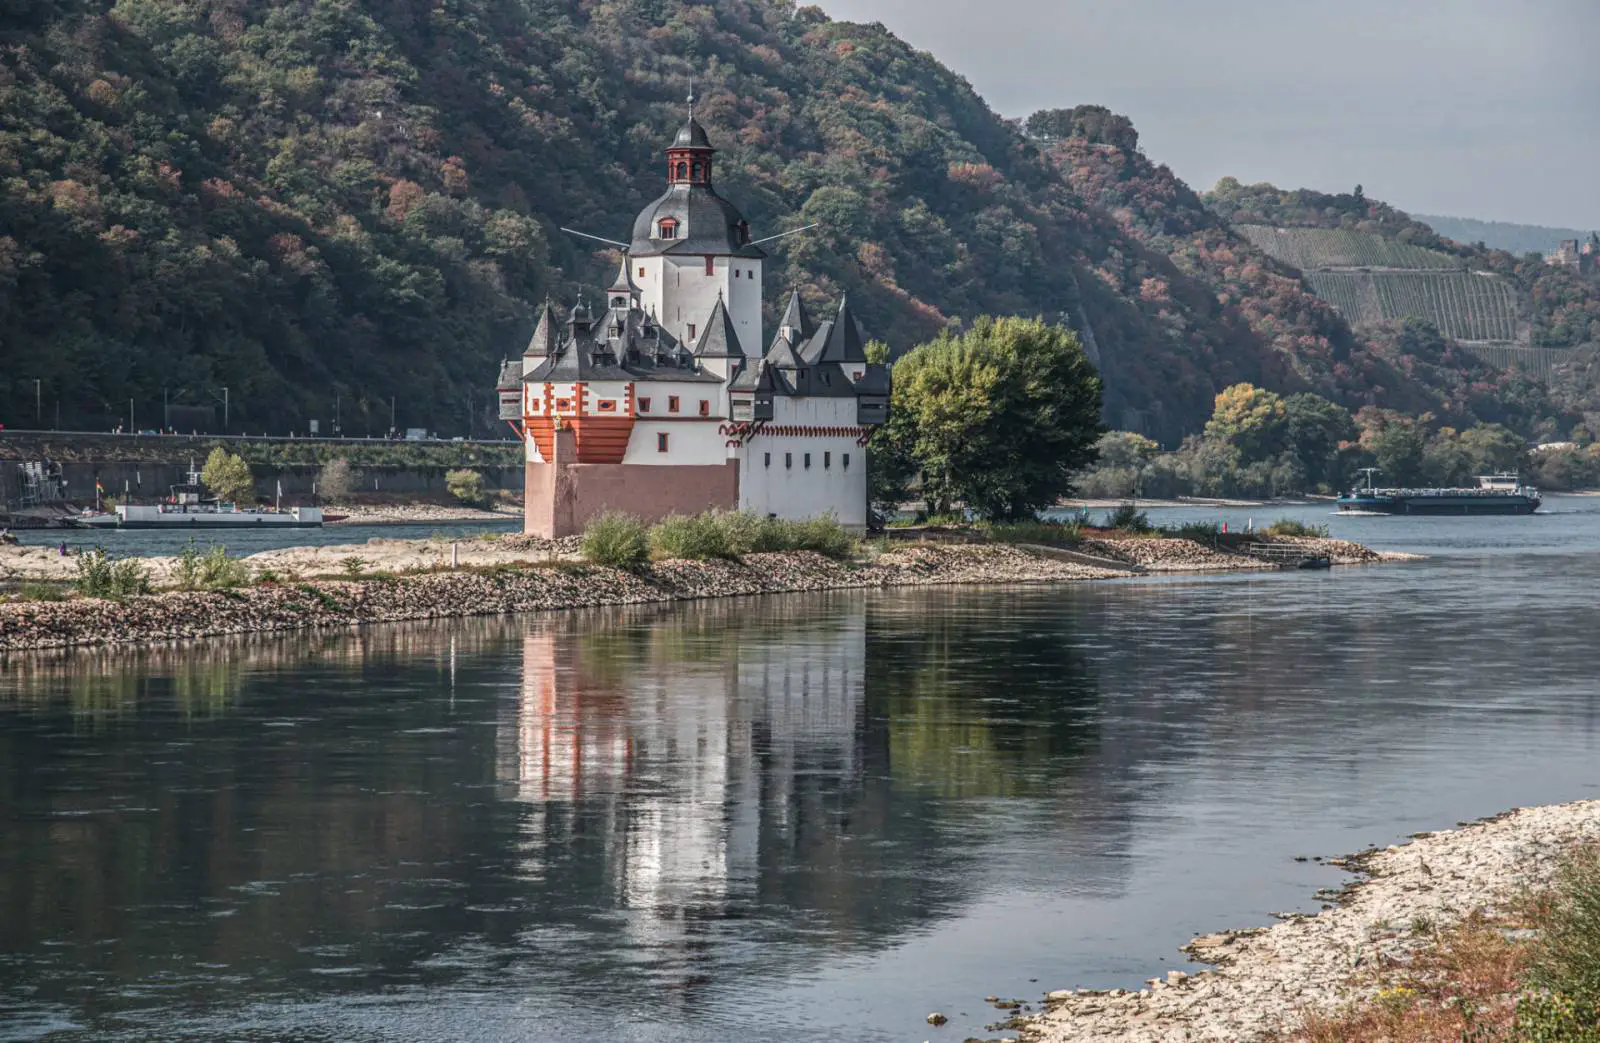 Sights along the Middle Rhine